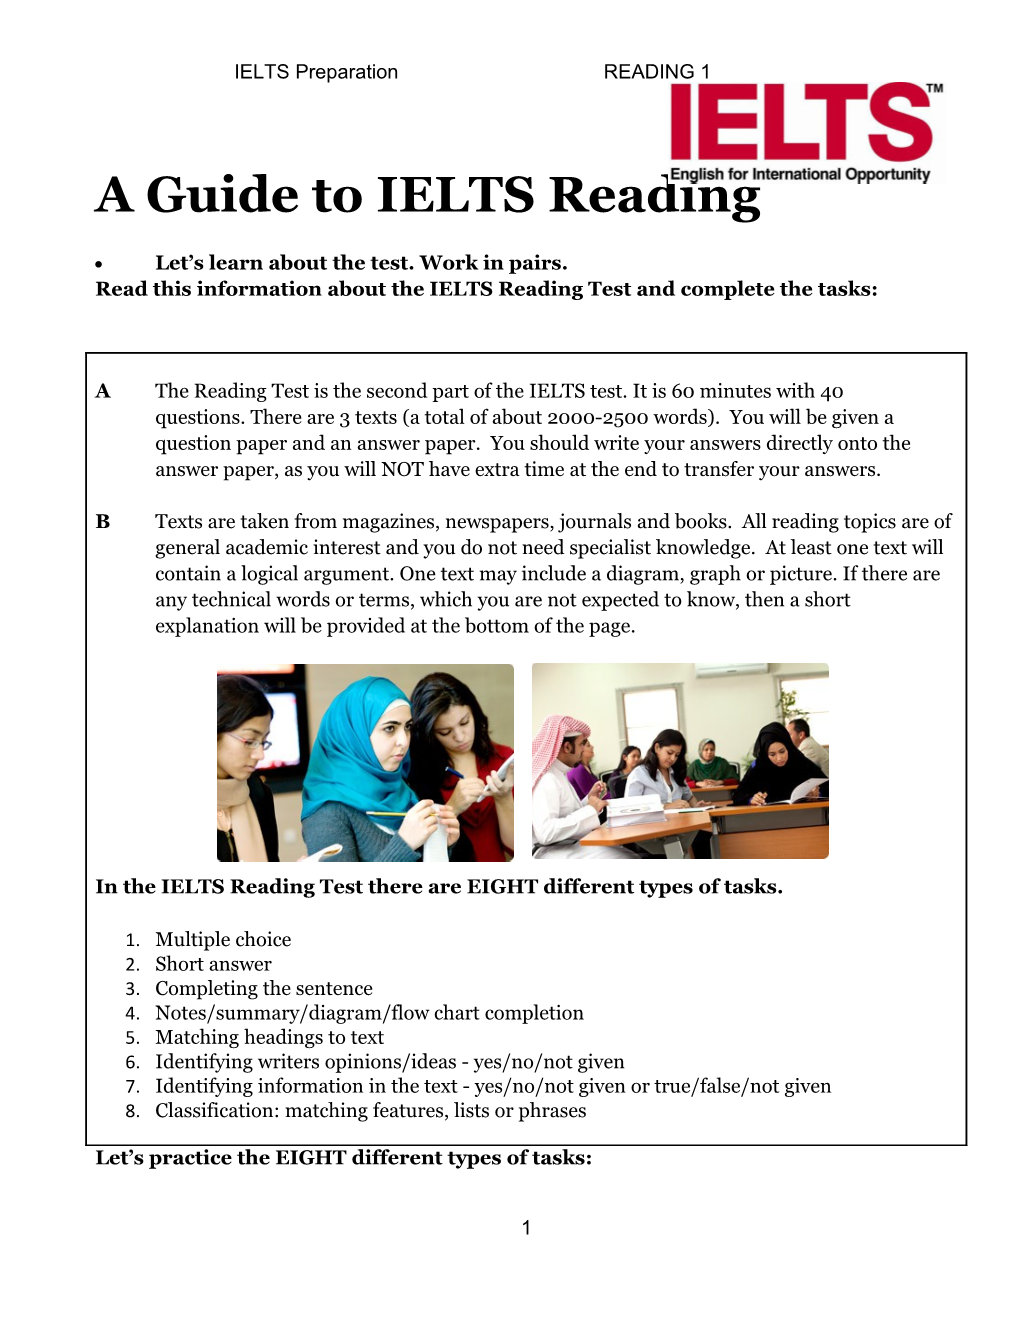 A Guide to IELTS Reading